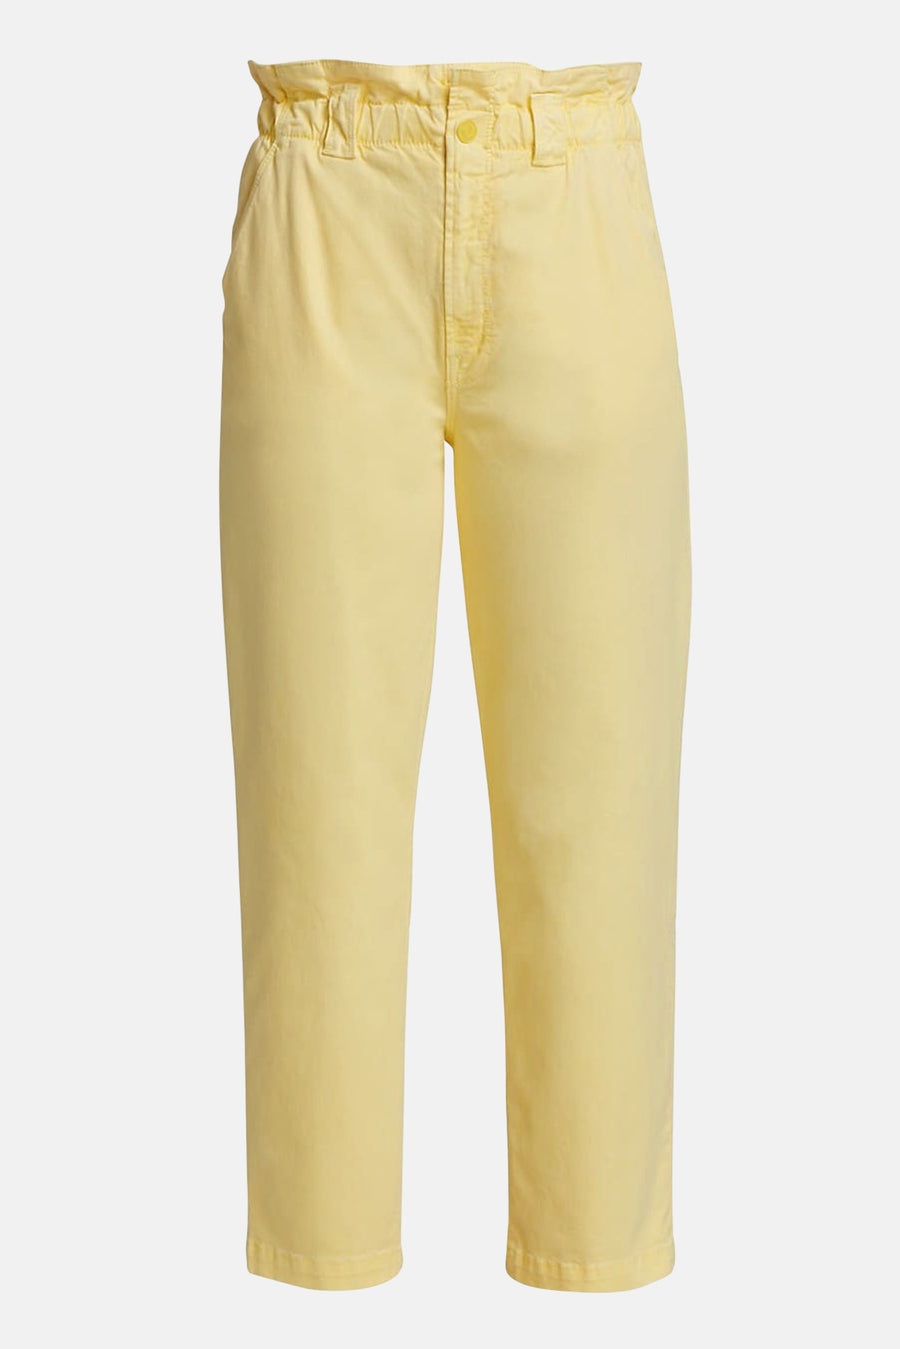 The Yoyo Ruffle Greaser Ankle Pants Goldfinch - blueandcream